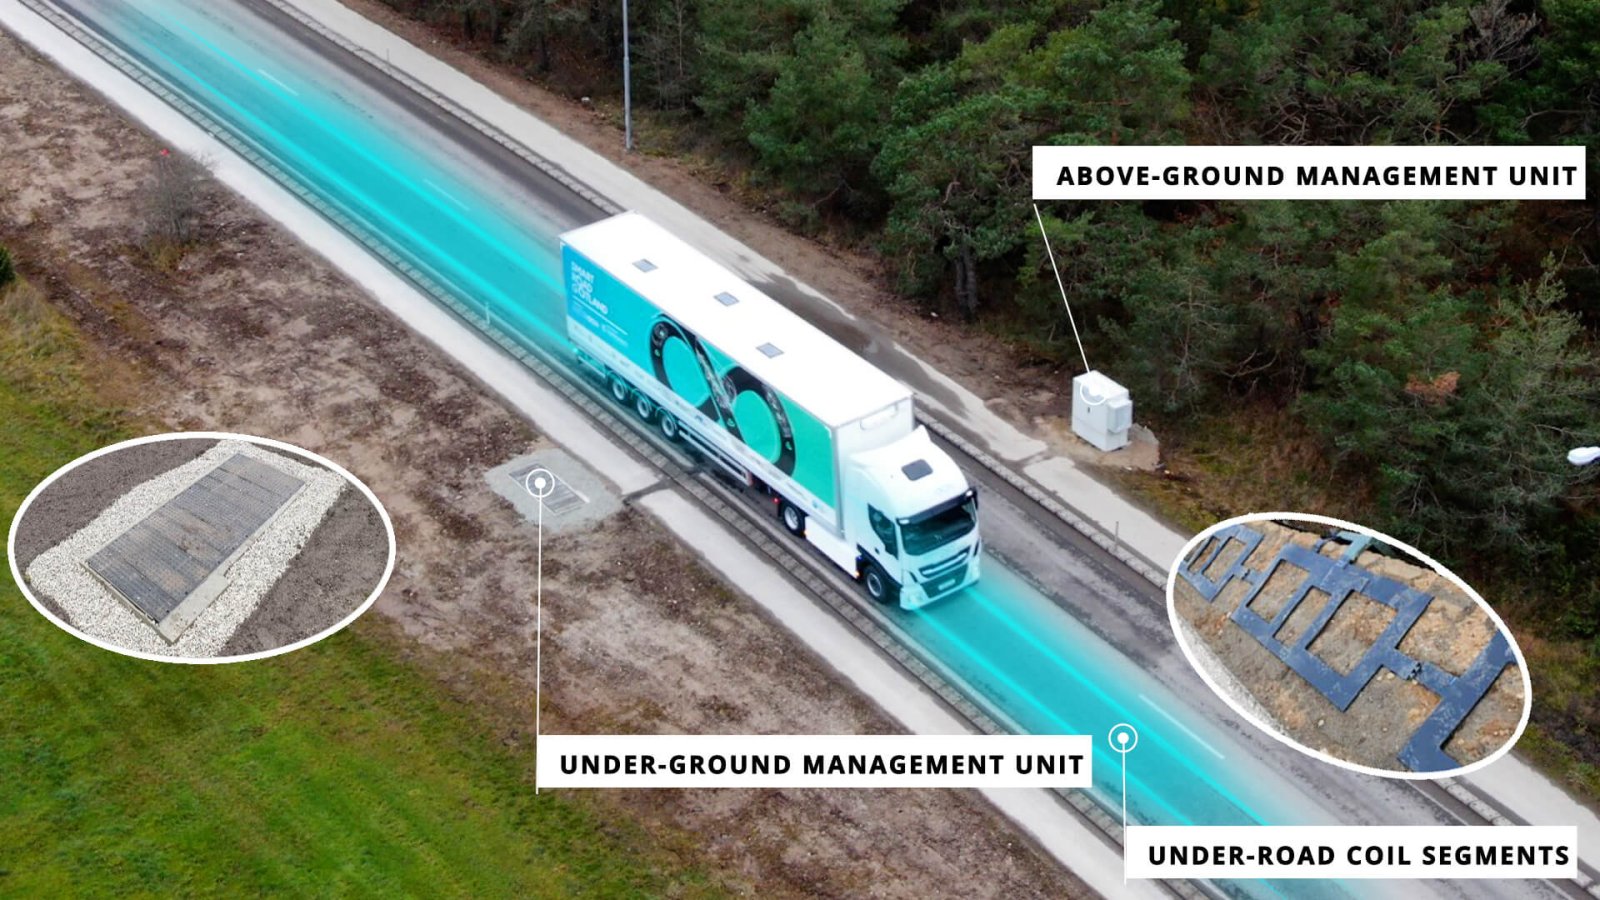 eTruck-powered-by-ElectReon-wirelessly-charging-tech-overview.jpg